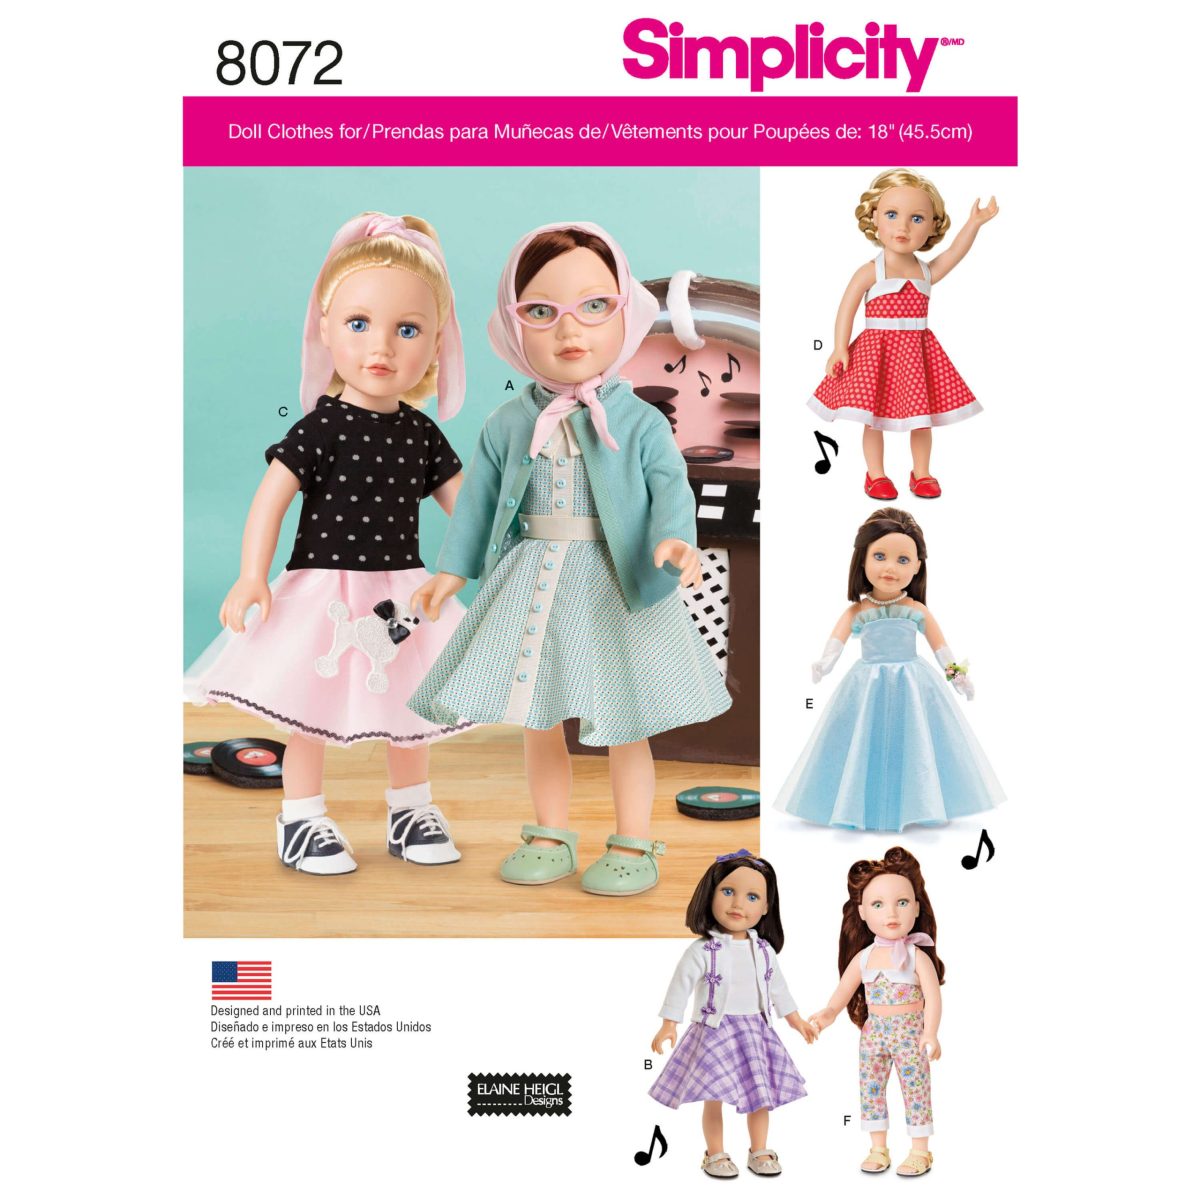 Simplicity Sewing Pattern 8072 Vintage Inspired 18" Doll Clothes